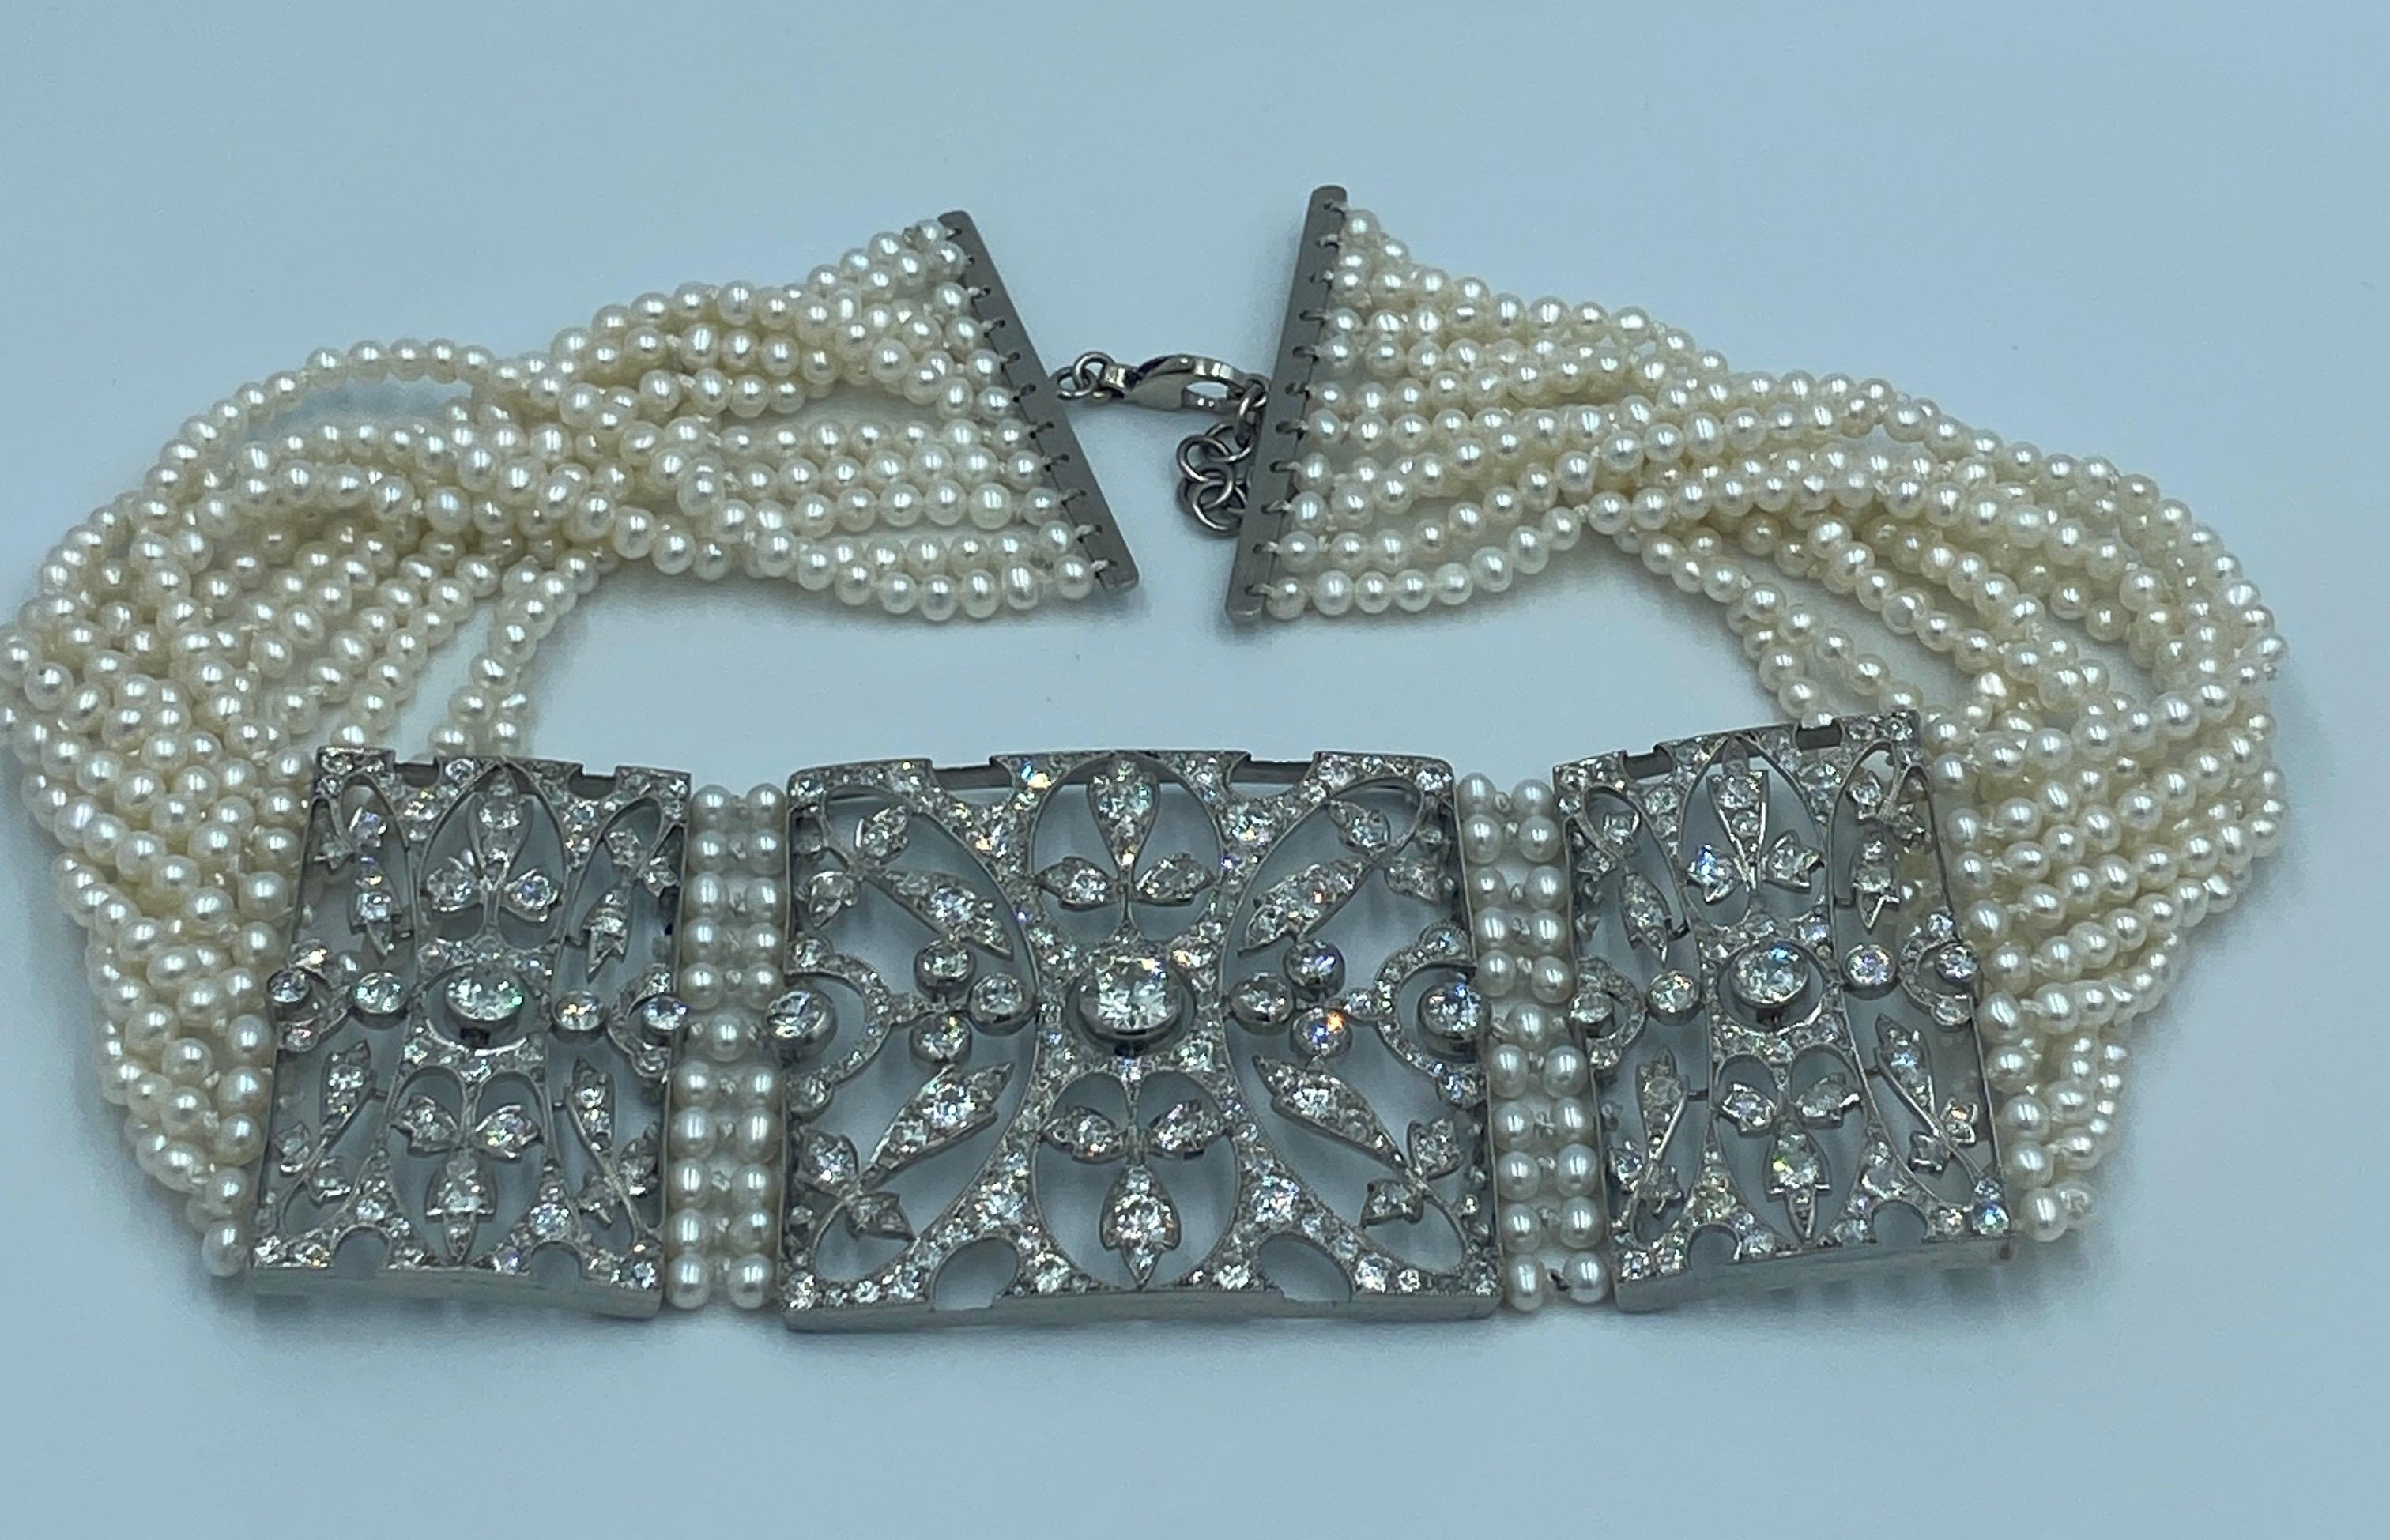 This 1940s European choker is a beautiful example of Art Deco jewellery. The choker has approximately 10 carats of diamonds with the centre stone weighing approximately 1.4 carats. The diamonds are old European cut and set in platinum. The choker's